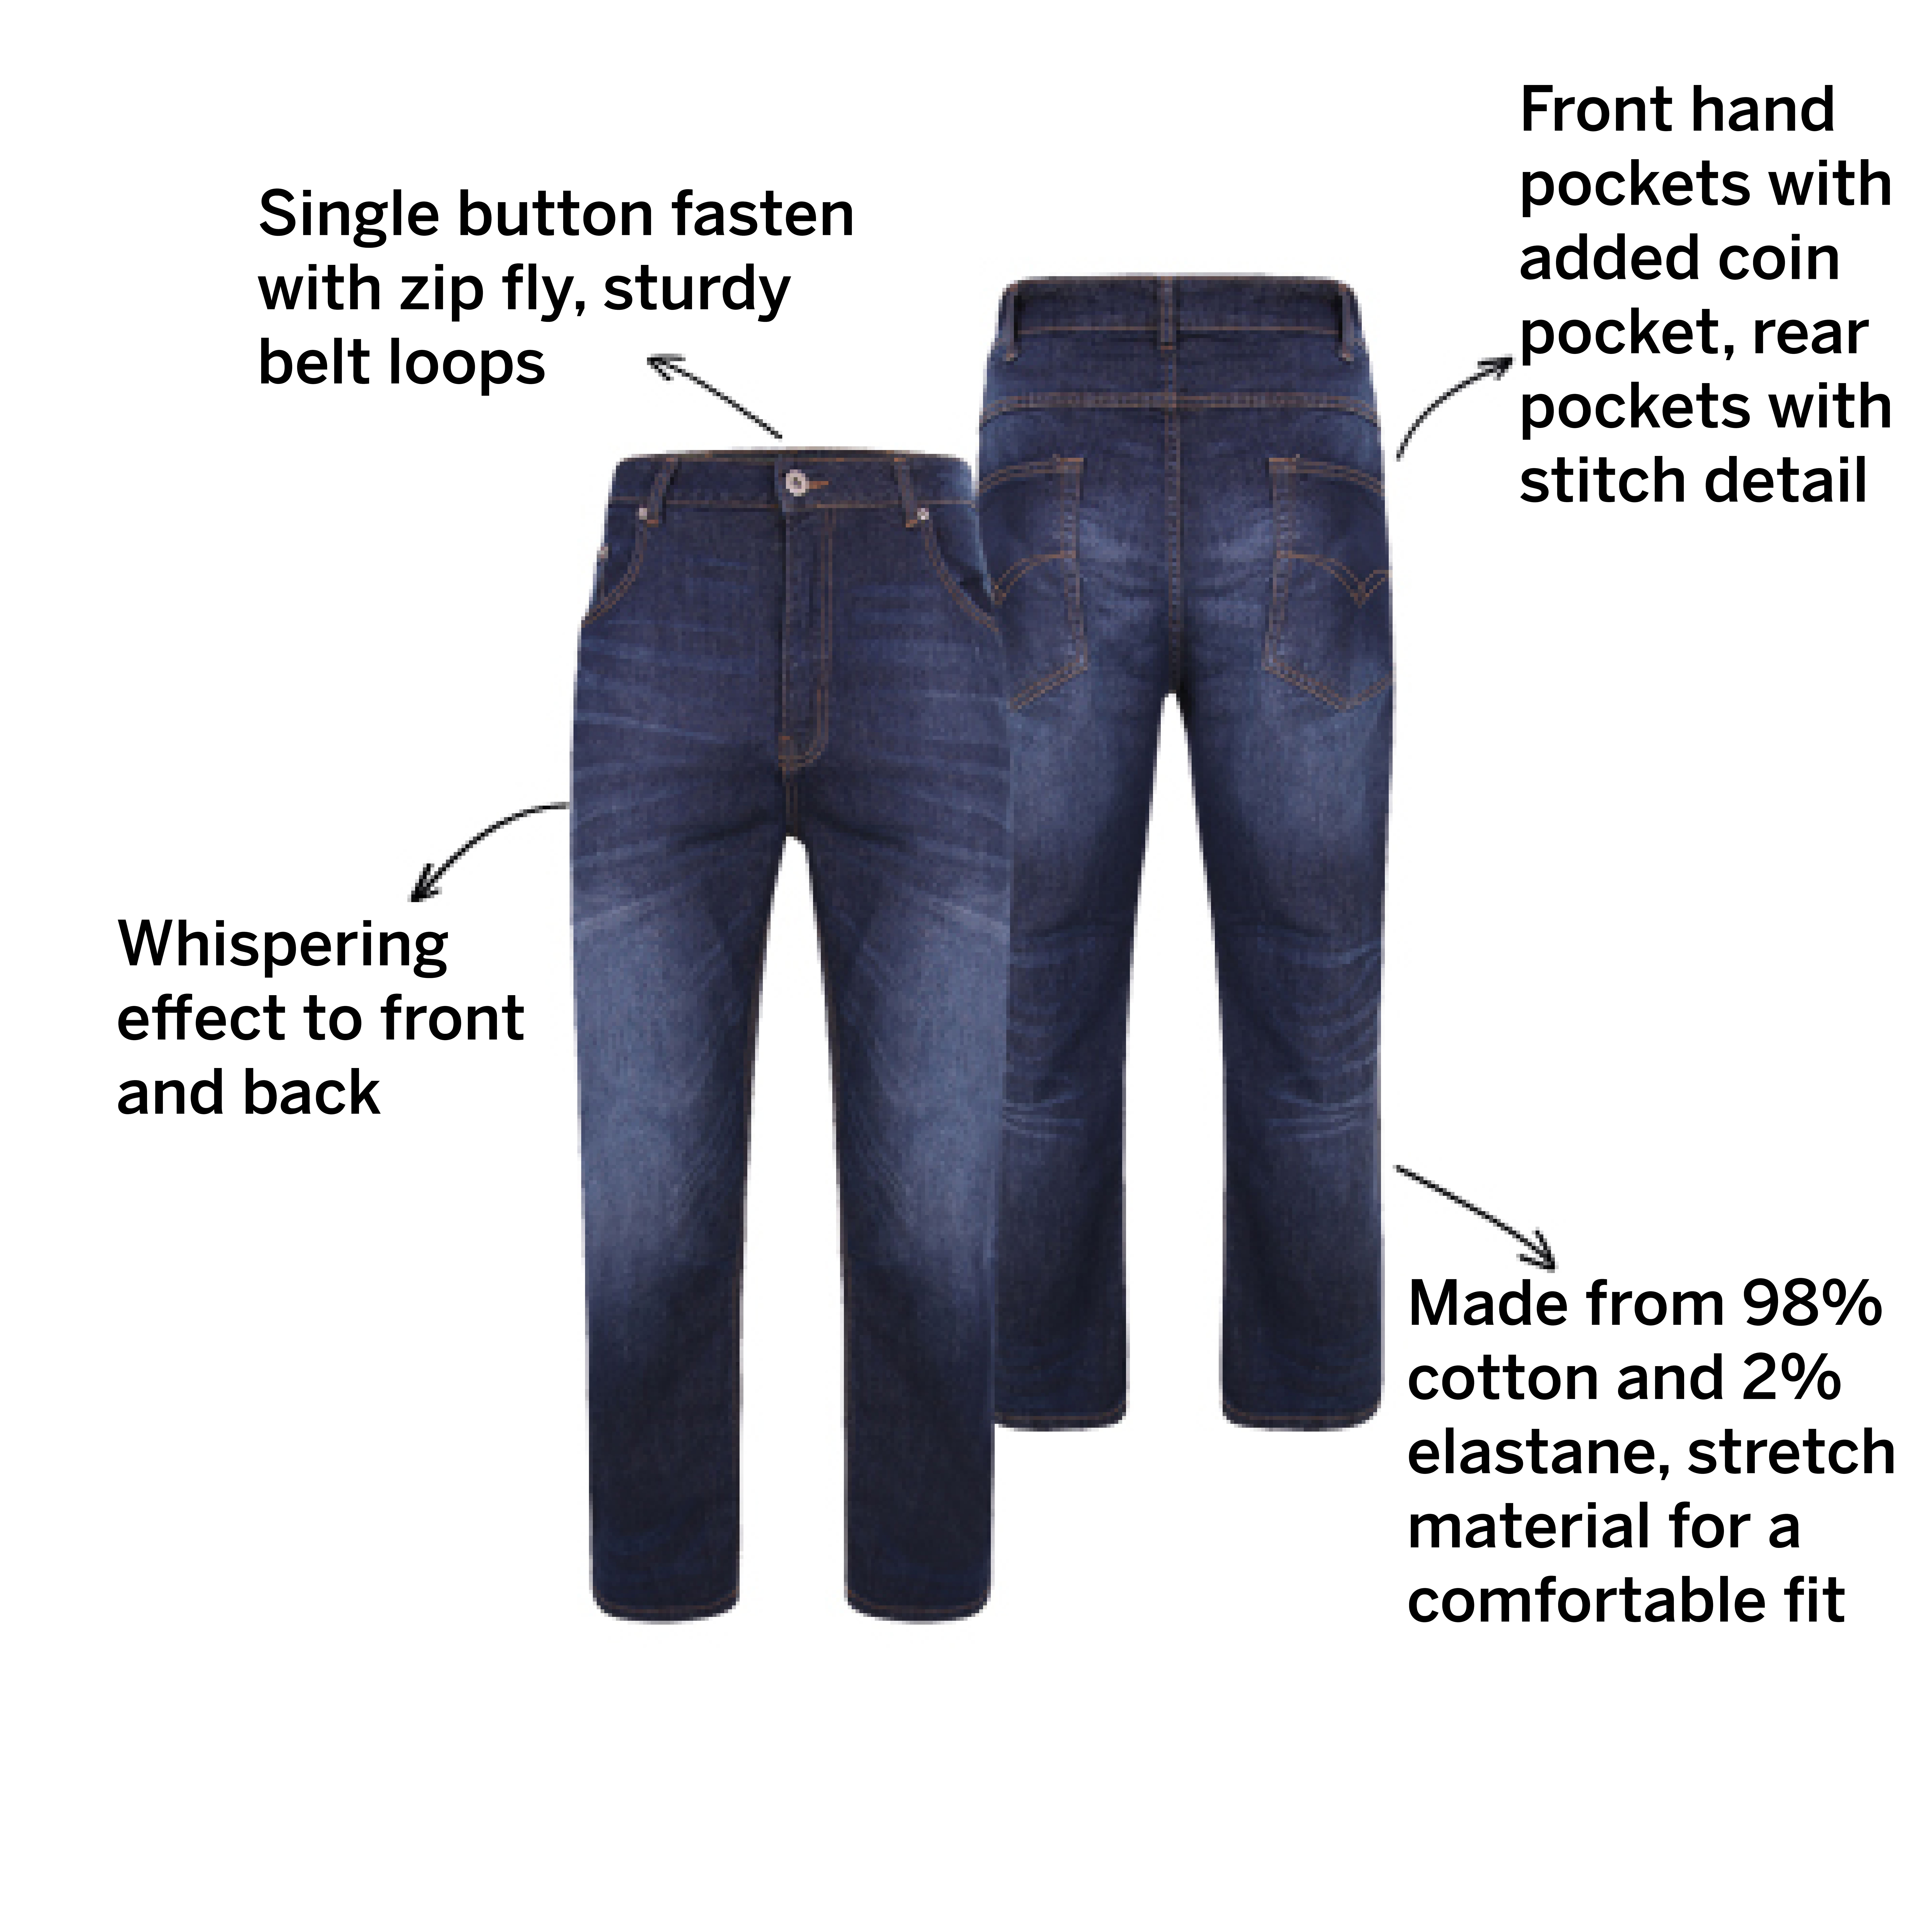 500$ dollars for jeans that look torn and dirty.... why :  r/mildlyinfuriating